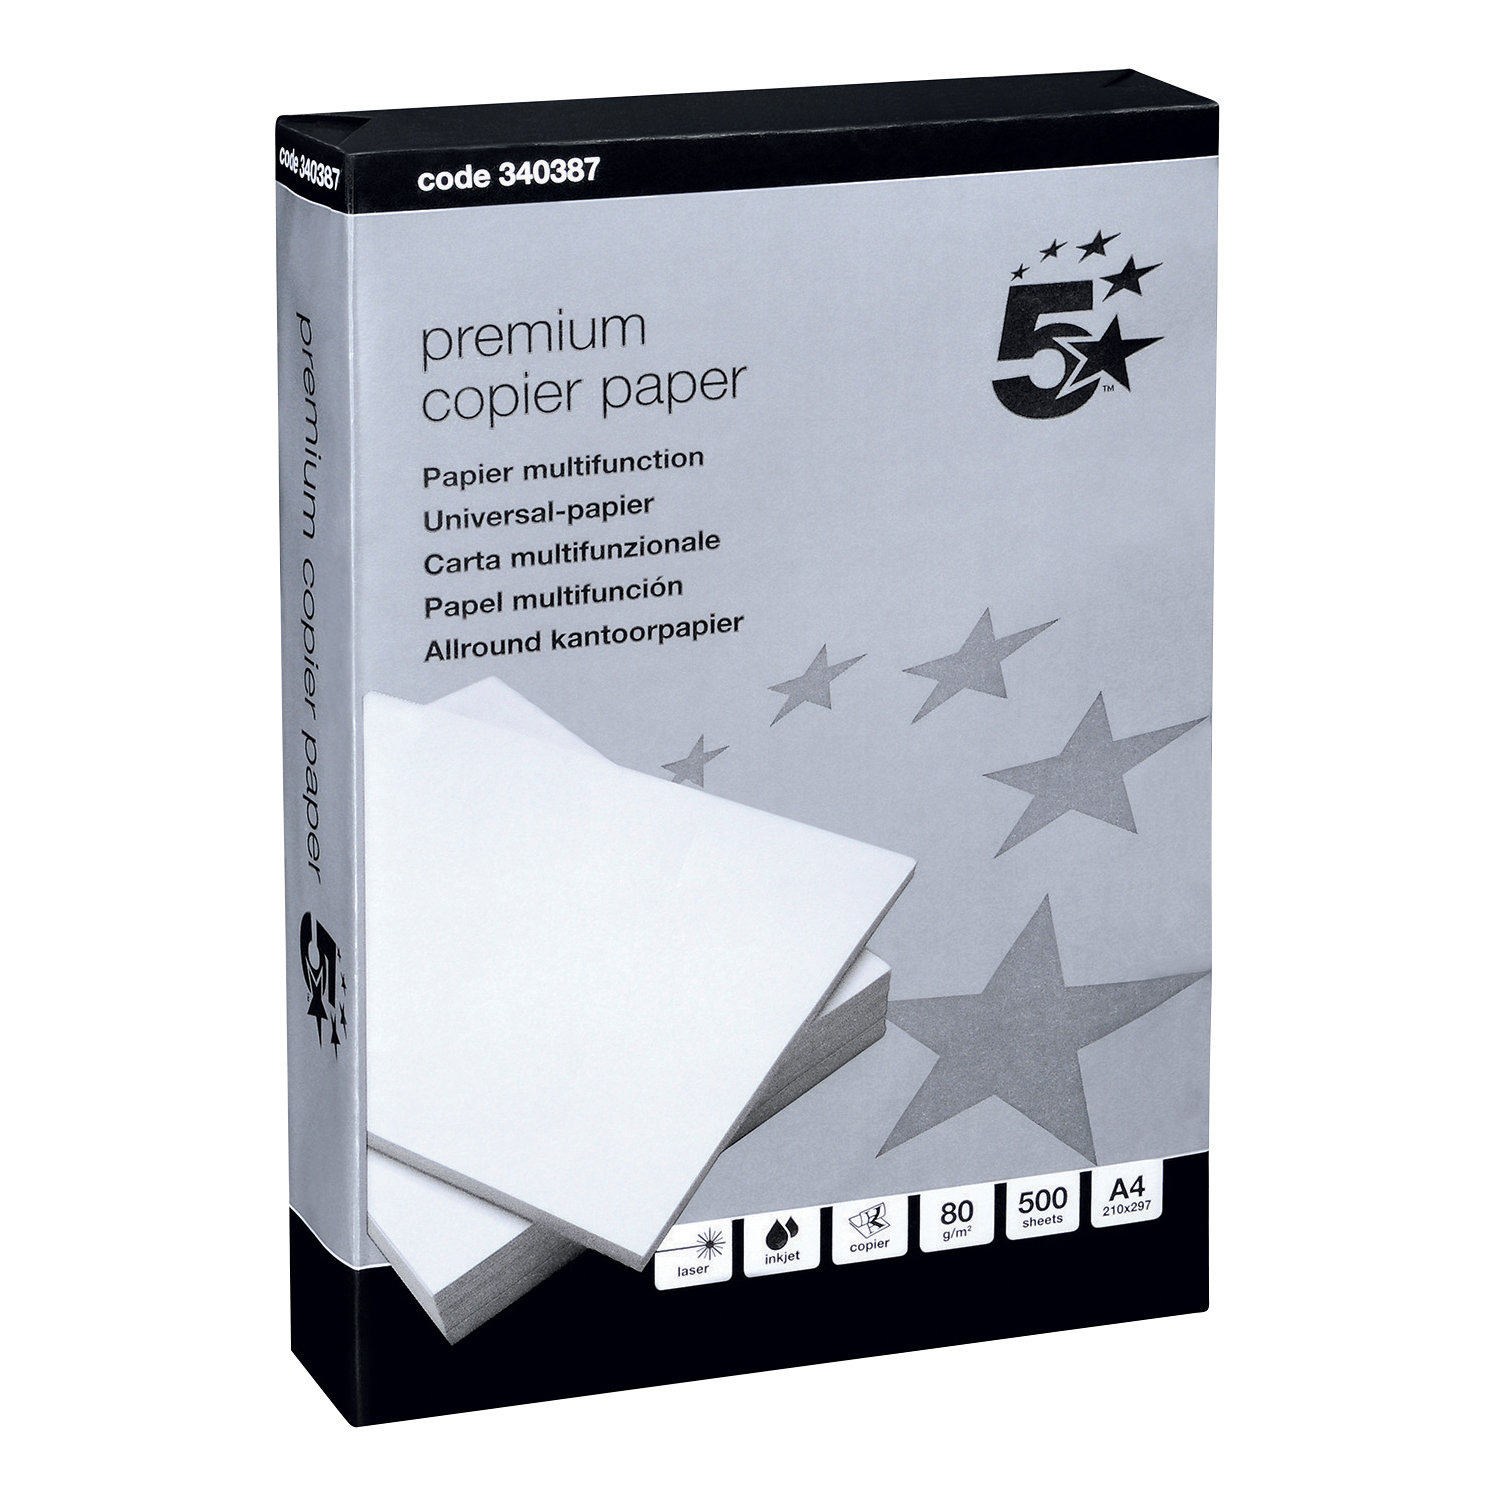 5 Star Premier Copier Paper Smooth 80gsm 500 Sheets per Ream A4 High White 1 Ream